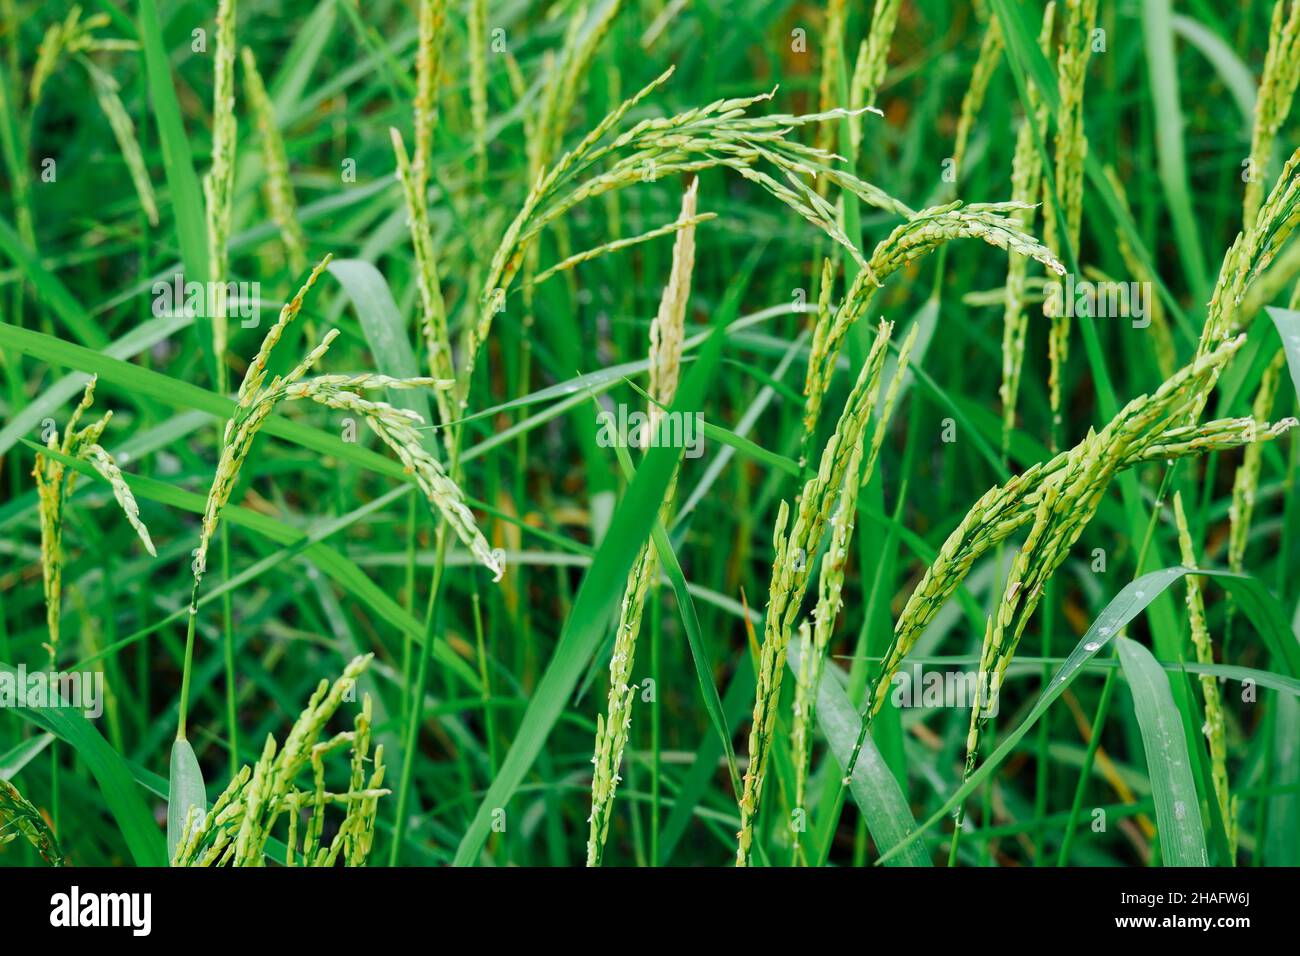 Close-up of yellow green rice fields, landscape of rice plants in a field, rice plants in a rice field, a field of ripe rice grown in Thailand. Stock Photo